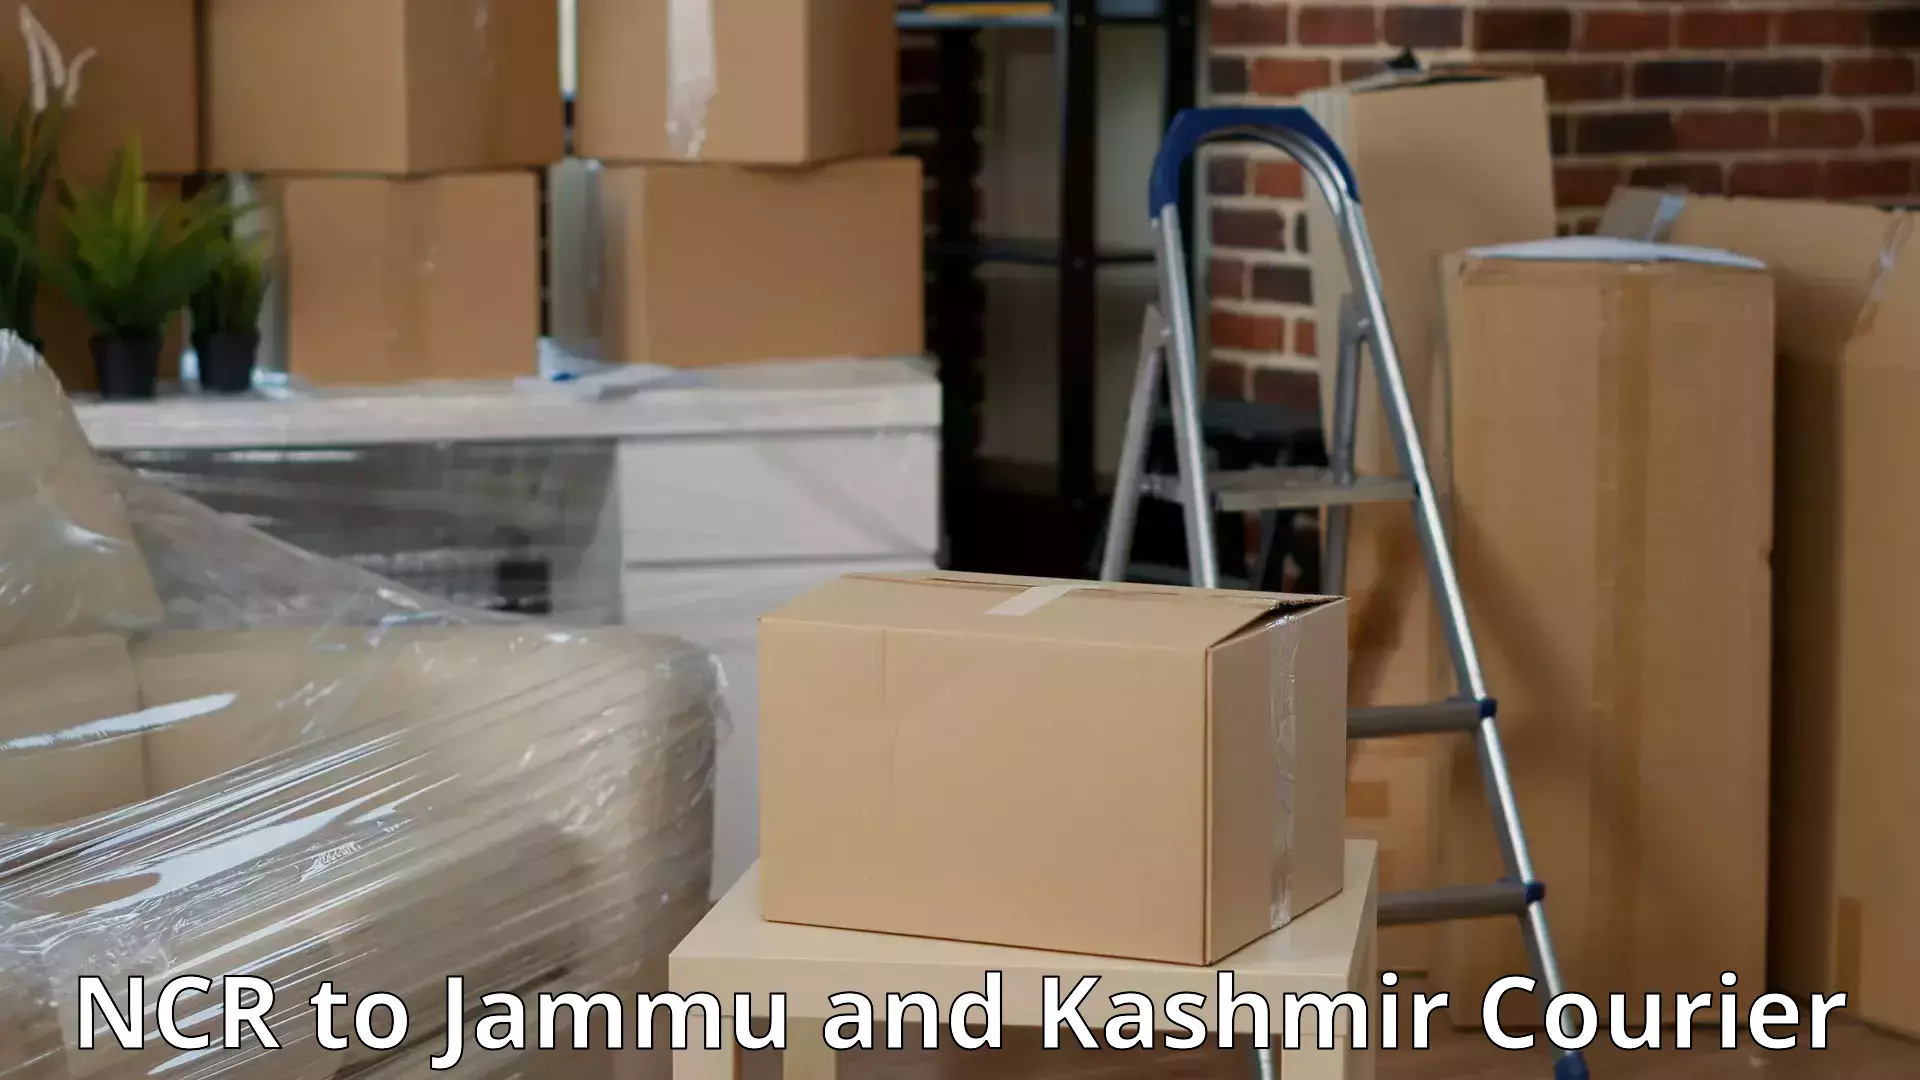 Furniture relocation experts NCR to Jammu and Kashmir